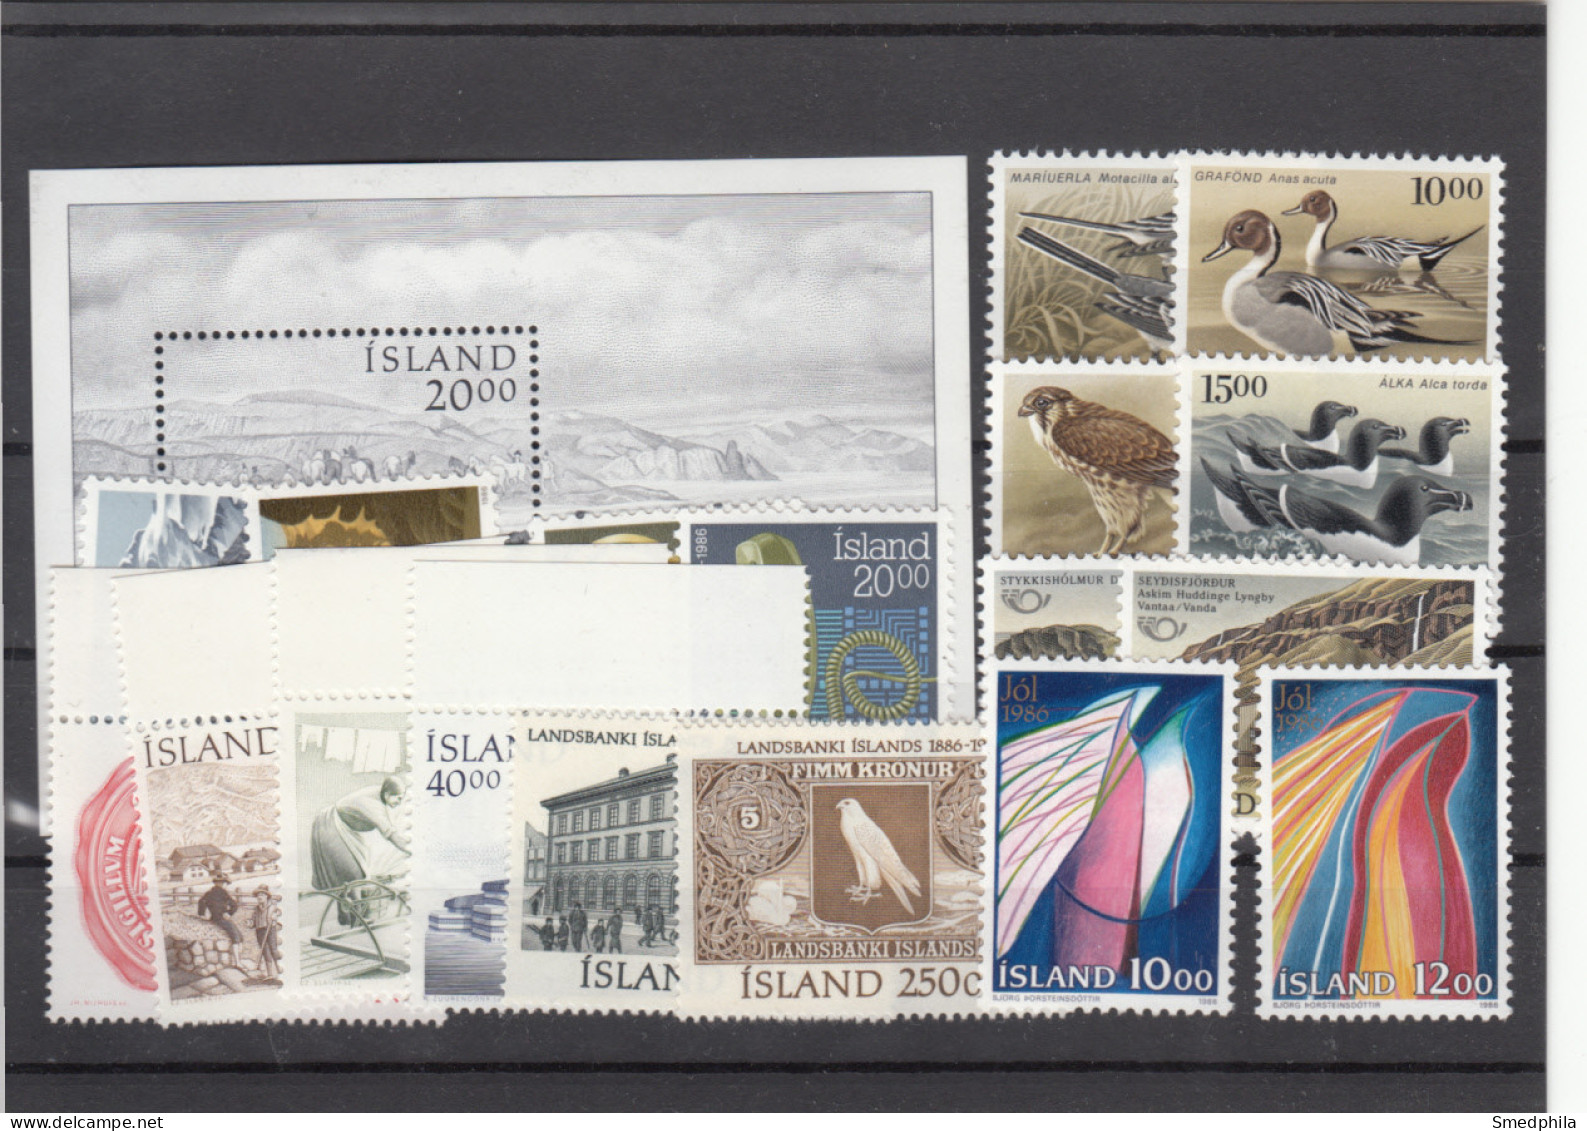 Iceland 1986 - Full Year MNH ** - Años Completos